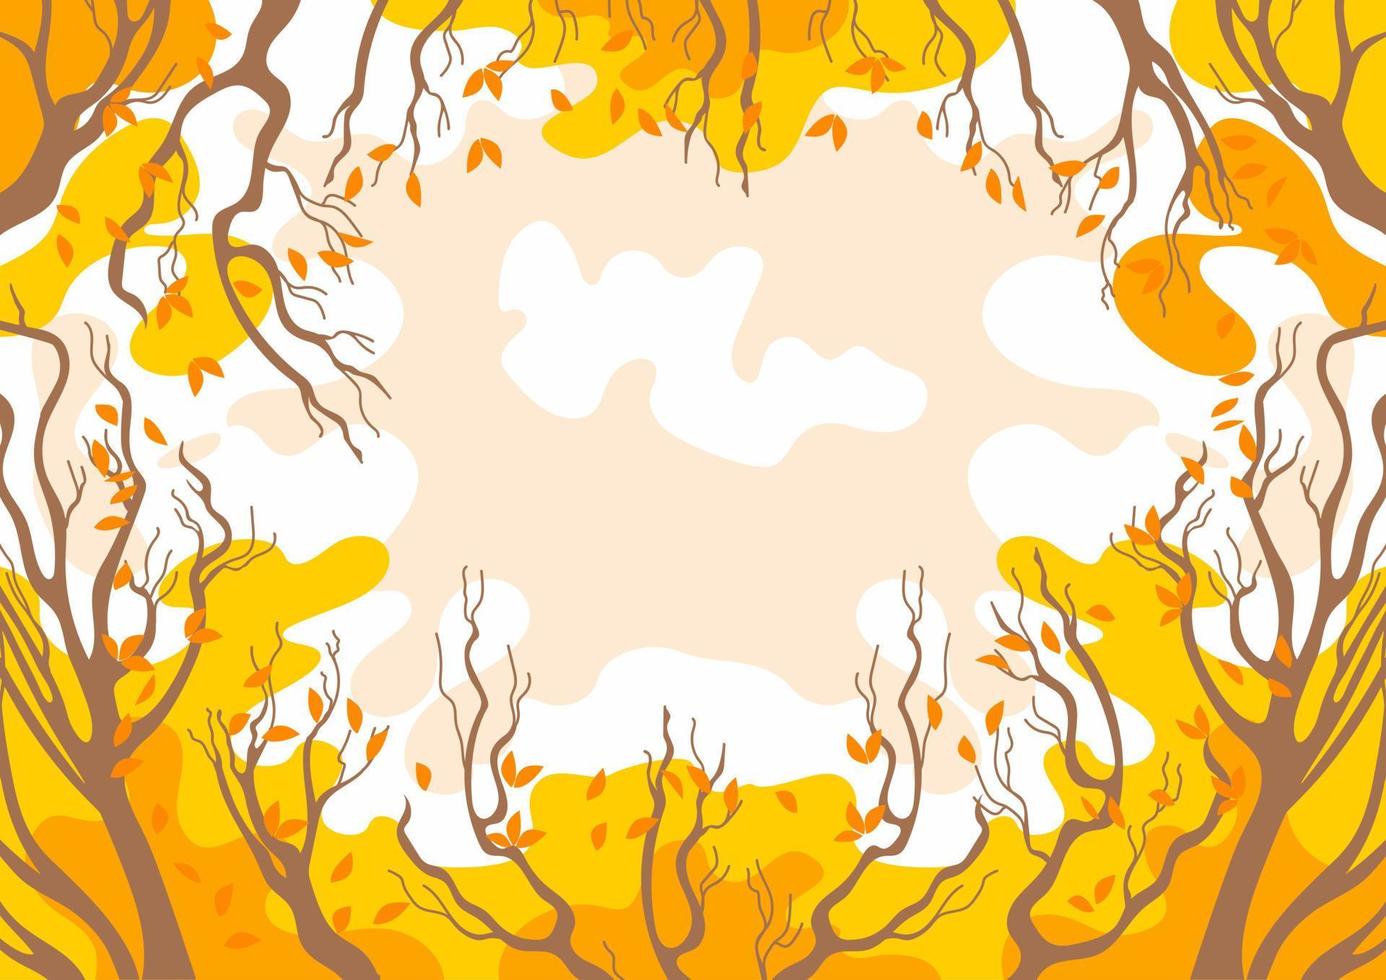 Hello, Autumn. Landscape background with place for text. Crowns of trees with yellowed leaves. Clouds in the sunset sky. For banner, poster, background vector